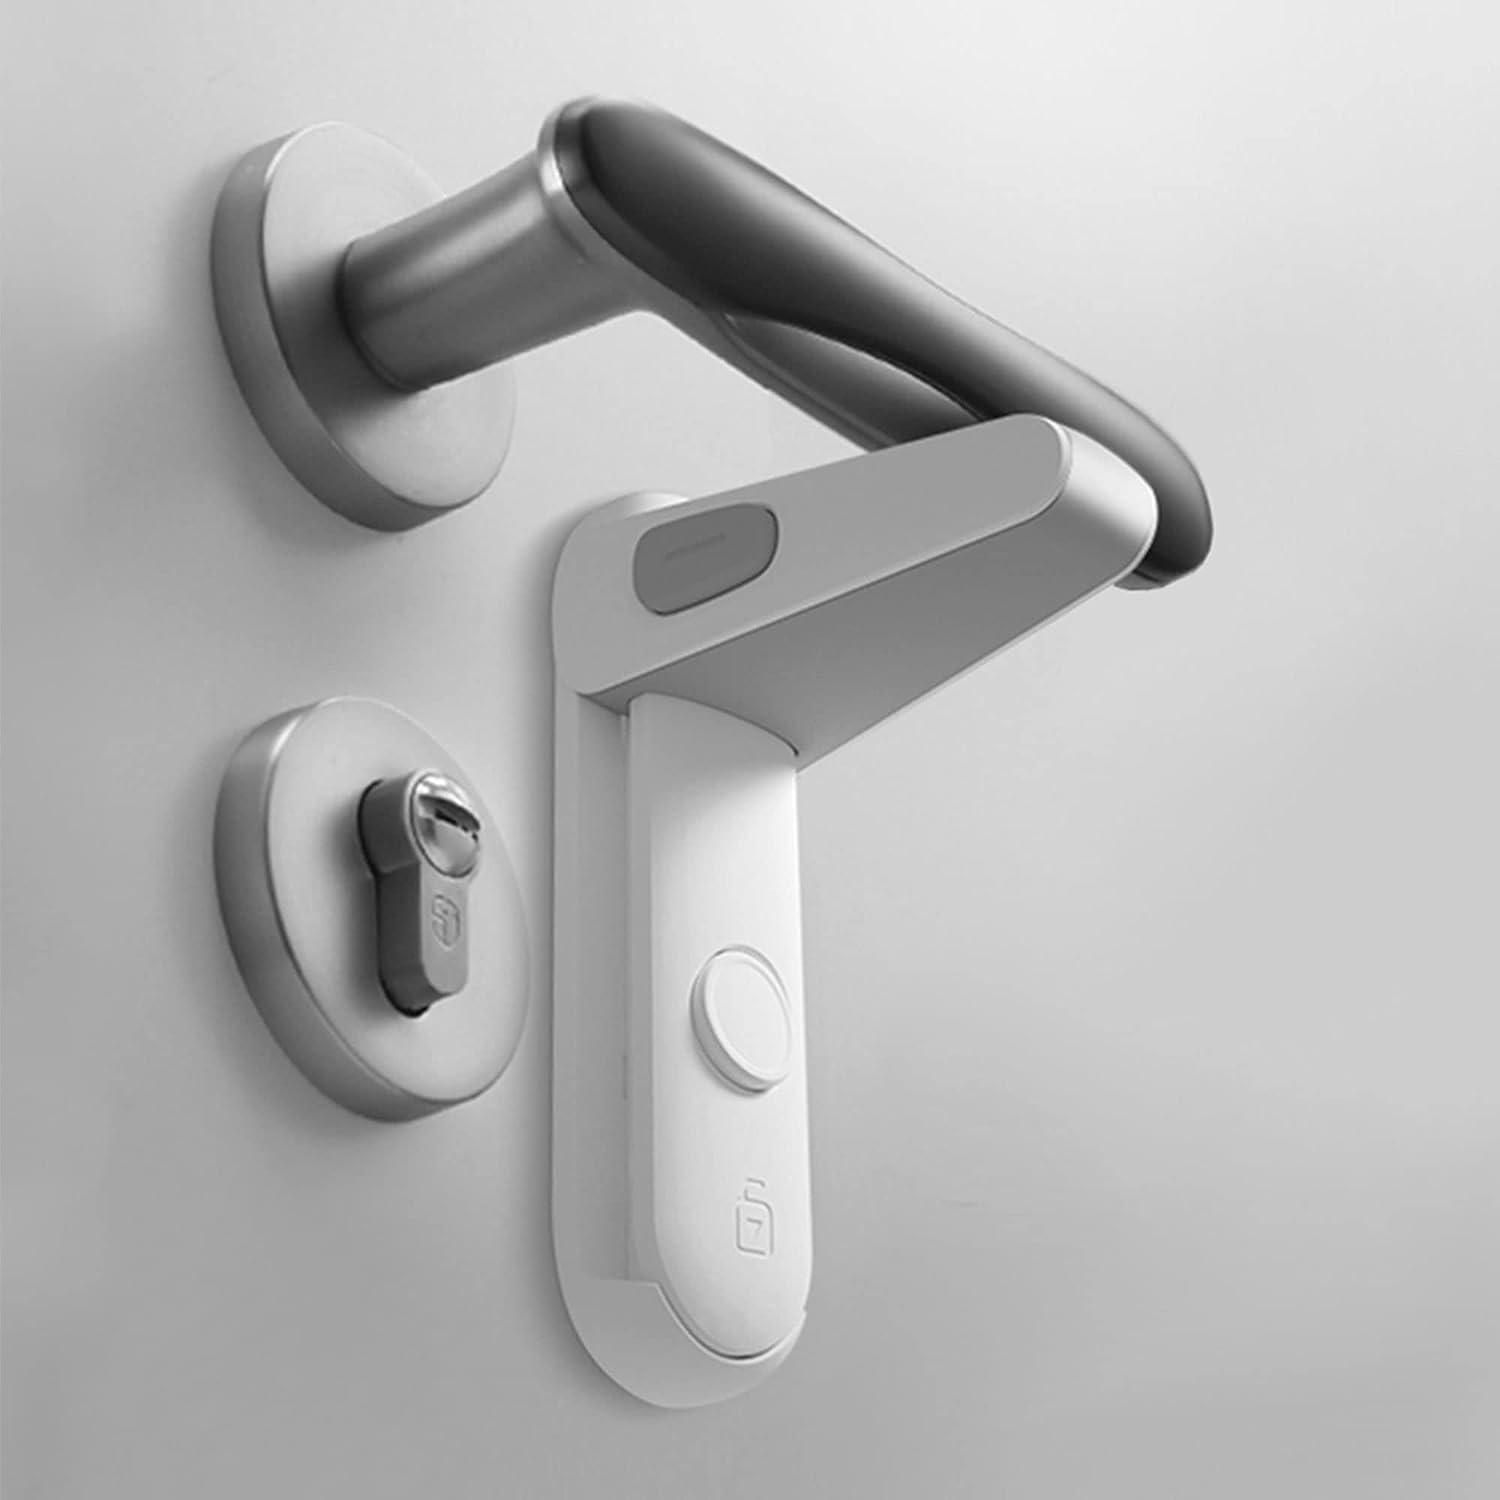 Moonybaby Home Safety-Magnetic Cabinet Locks moonybaby